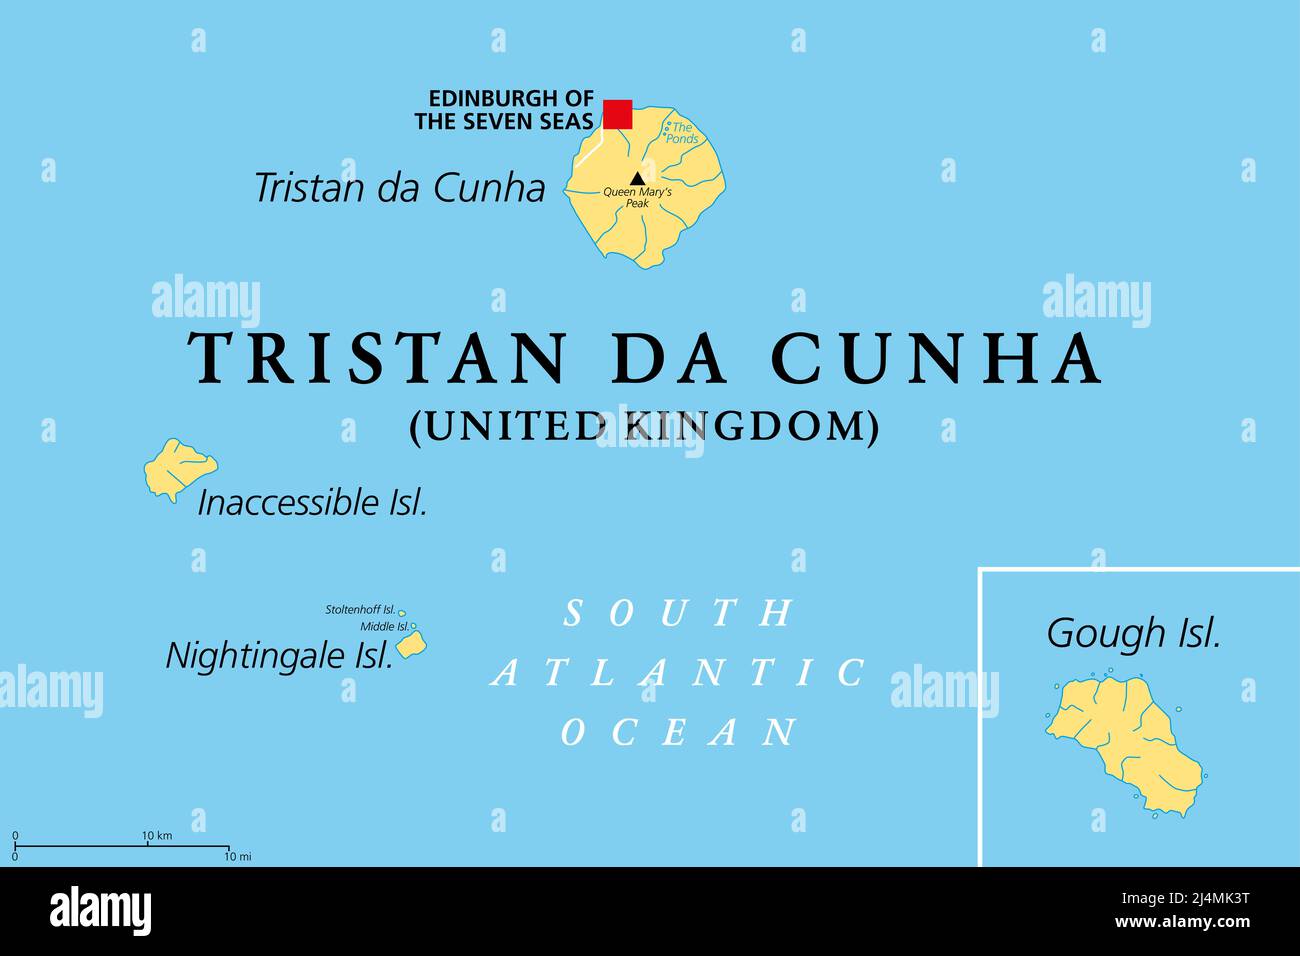 Tristan da Cunha, Inaccessible, Nightingale and Gough Island political map. Remote group of volcanic islands in the South Atlantic. Stock Photo